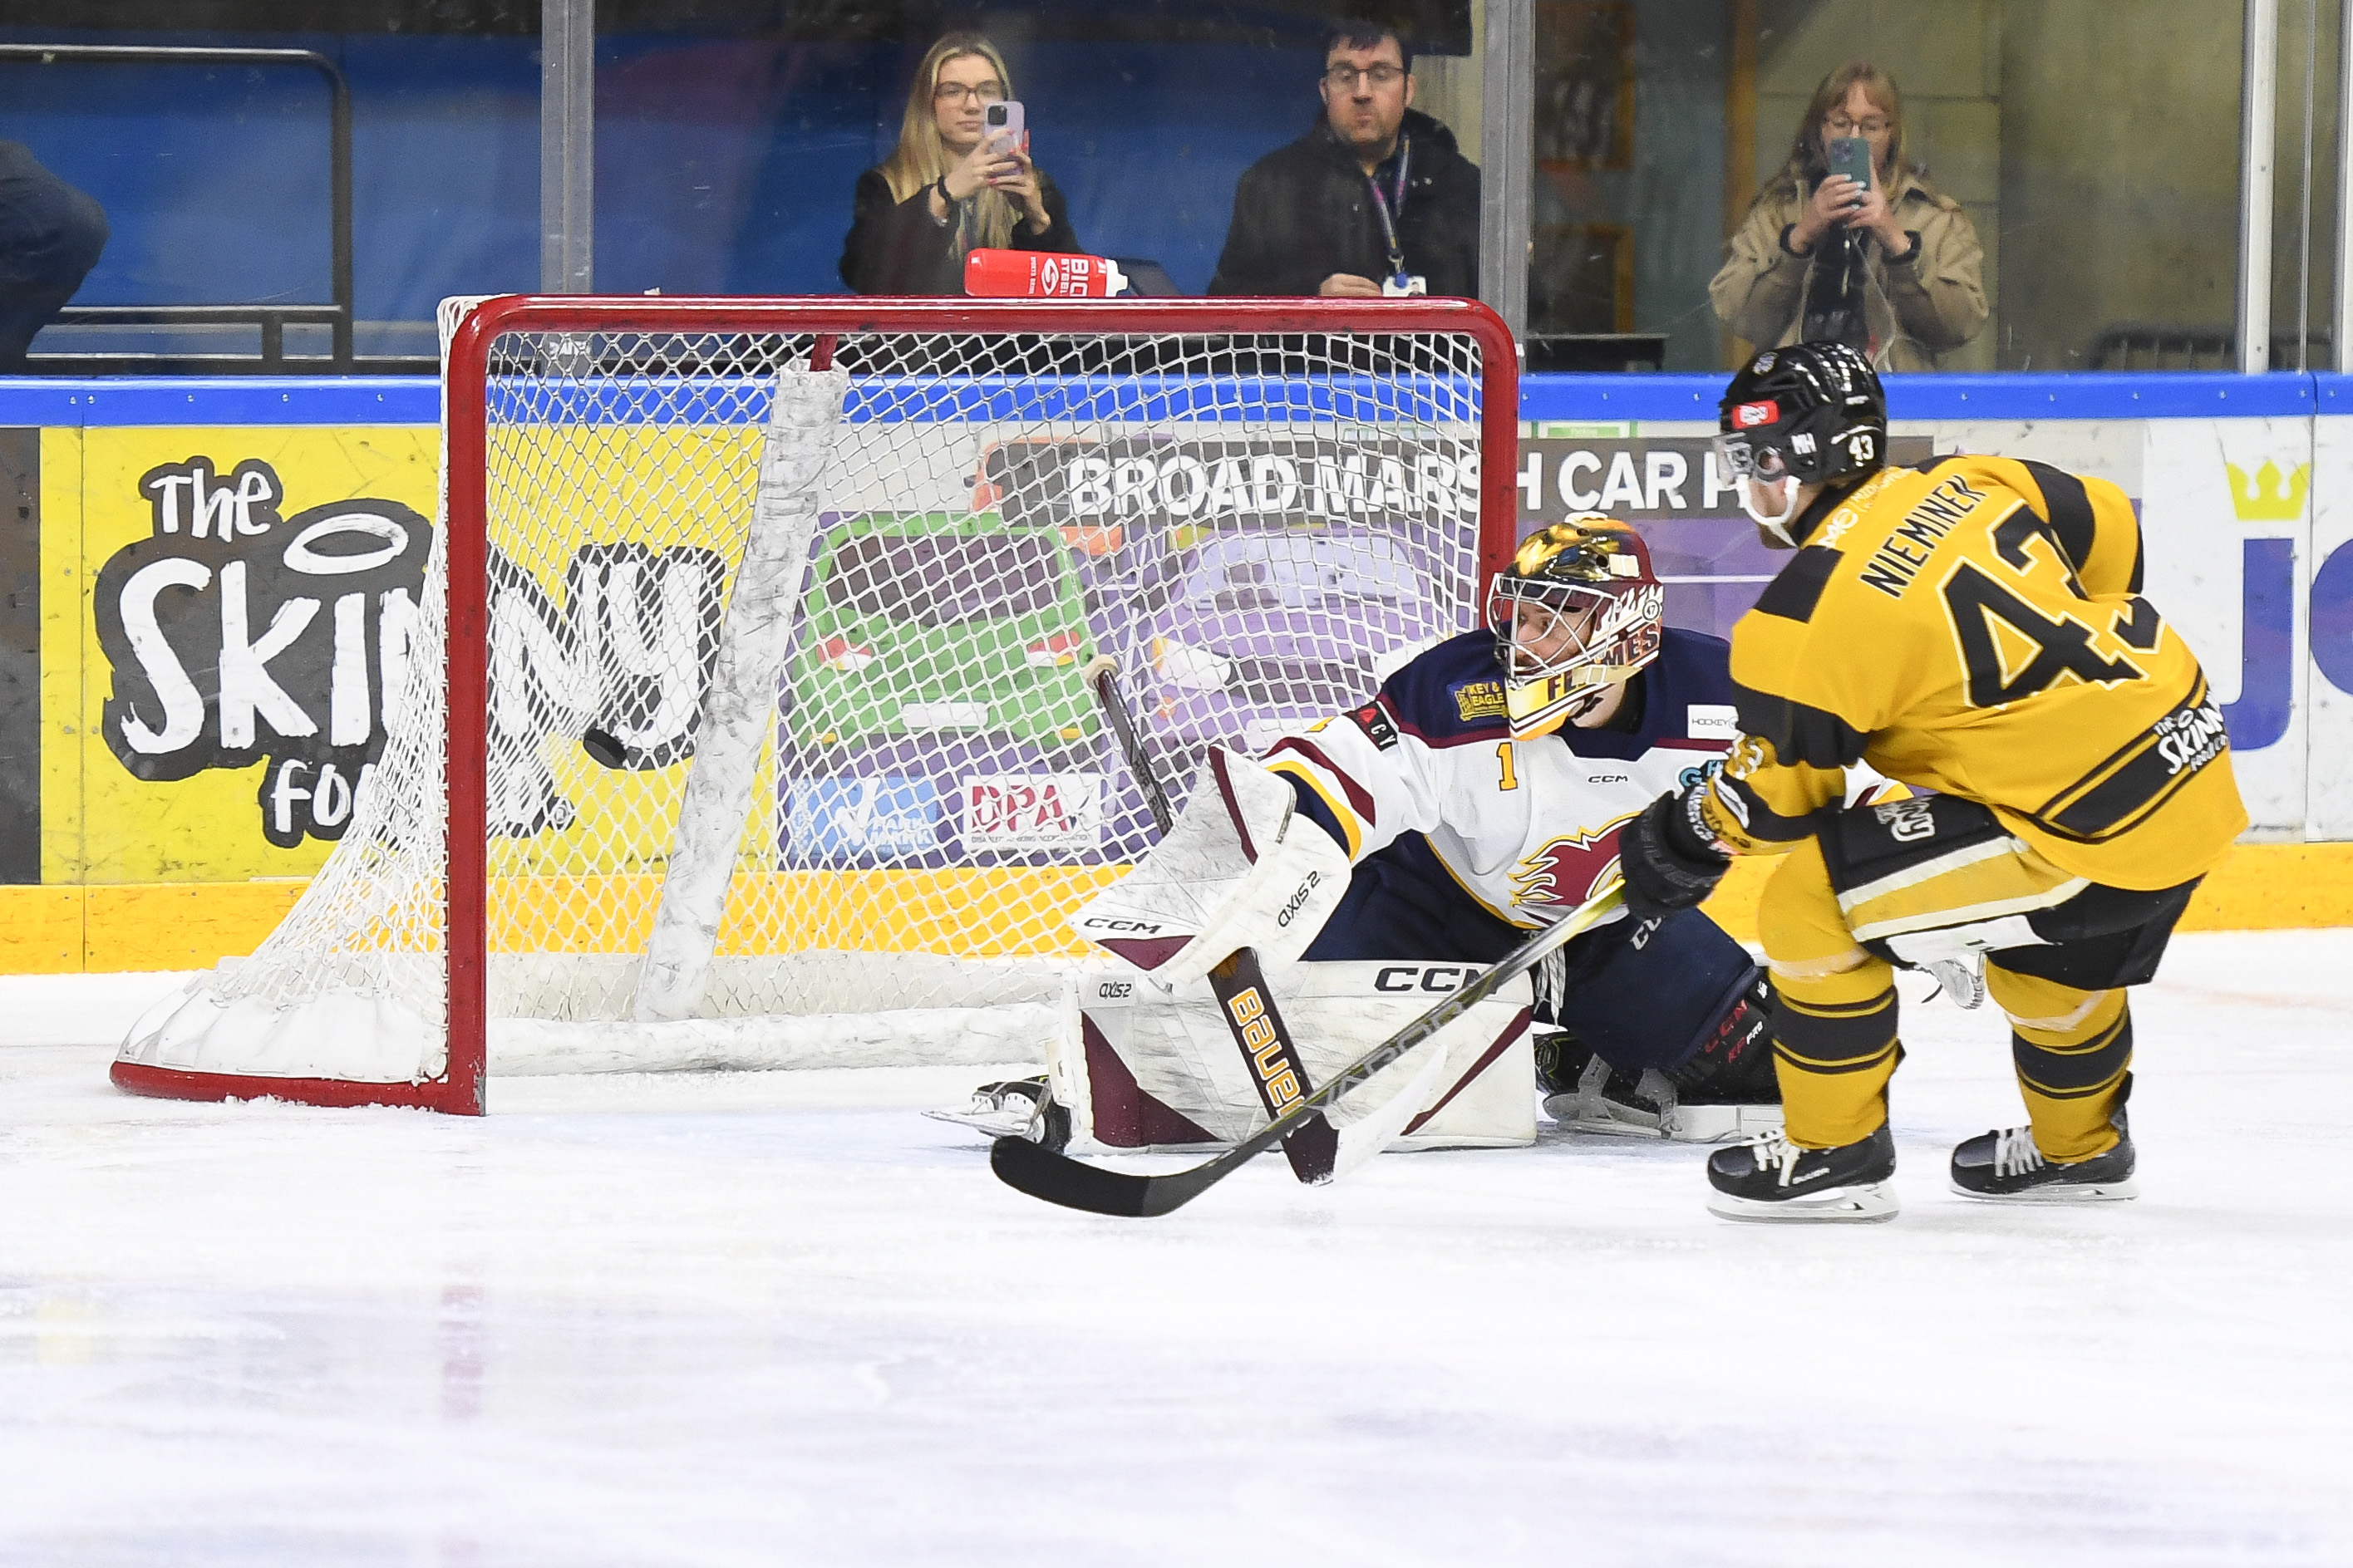 THE HIGHLIGHTS FROM A THRILLING WIN OVER FLAMES Top Image